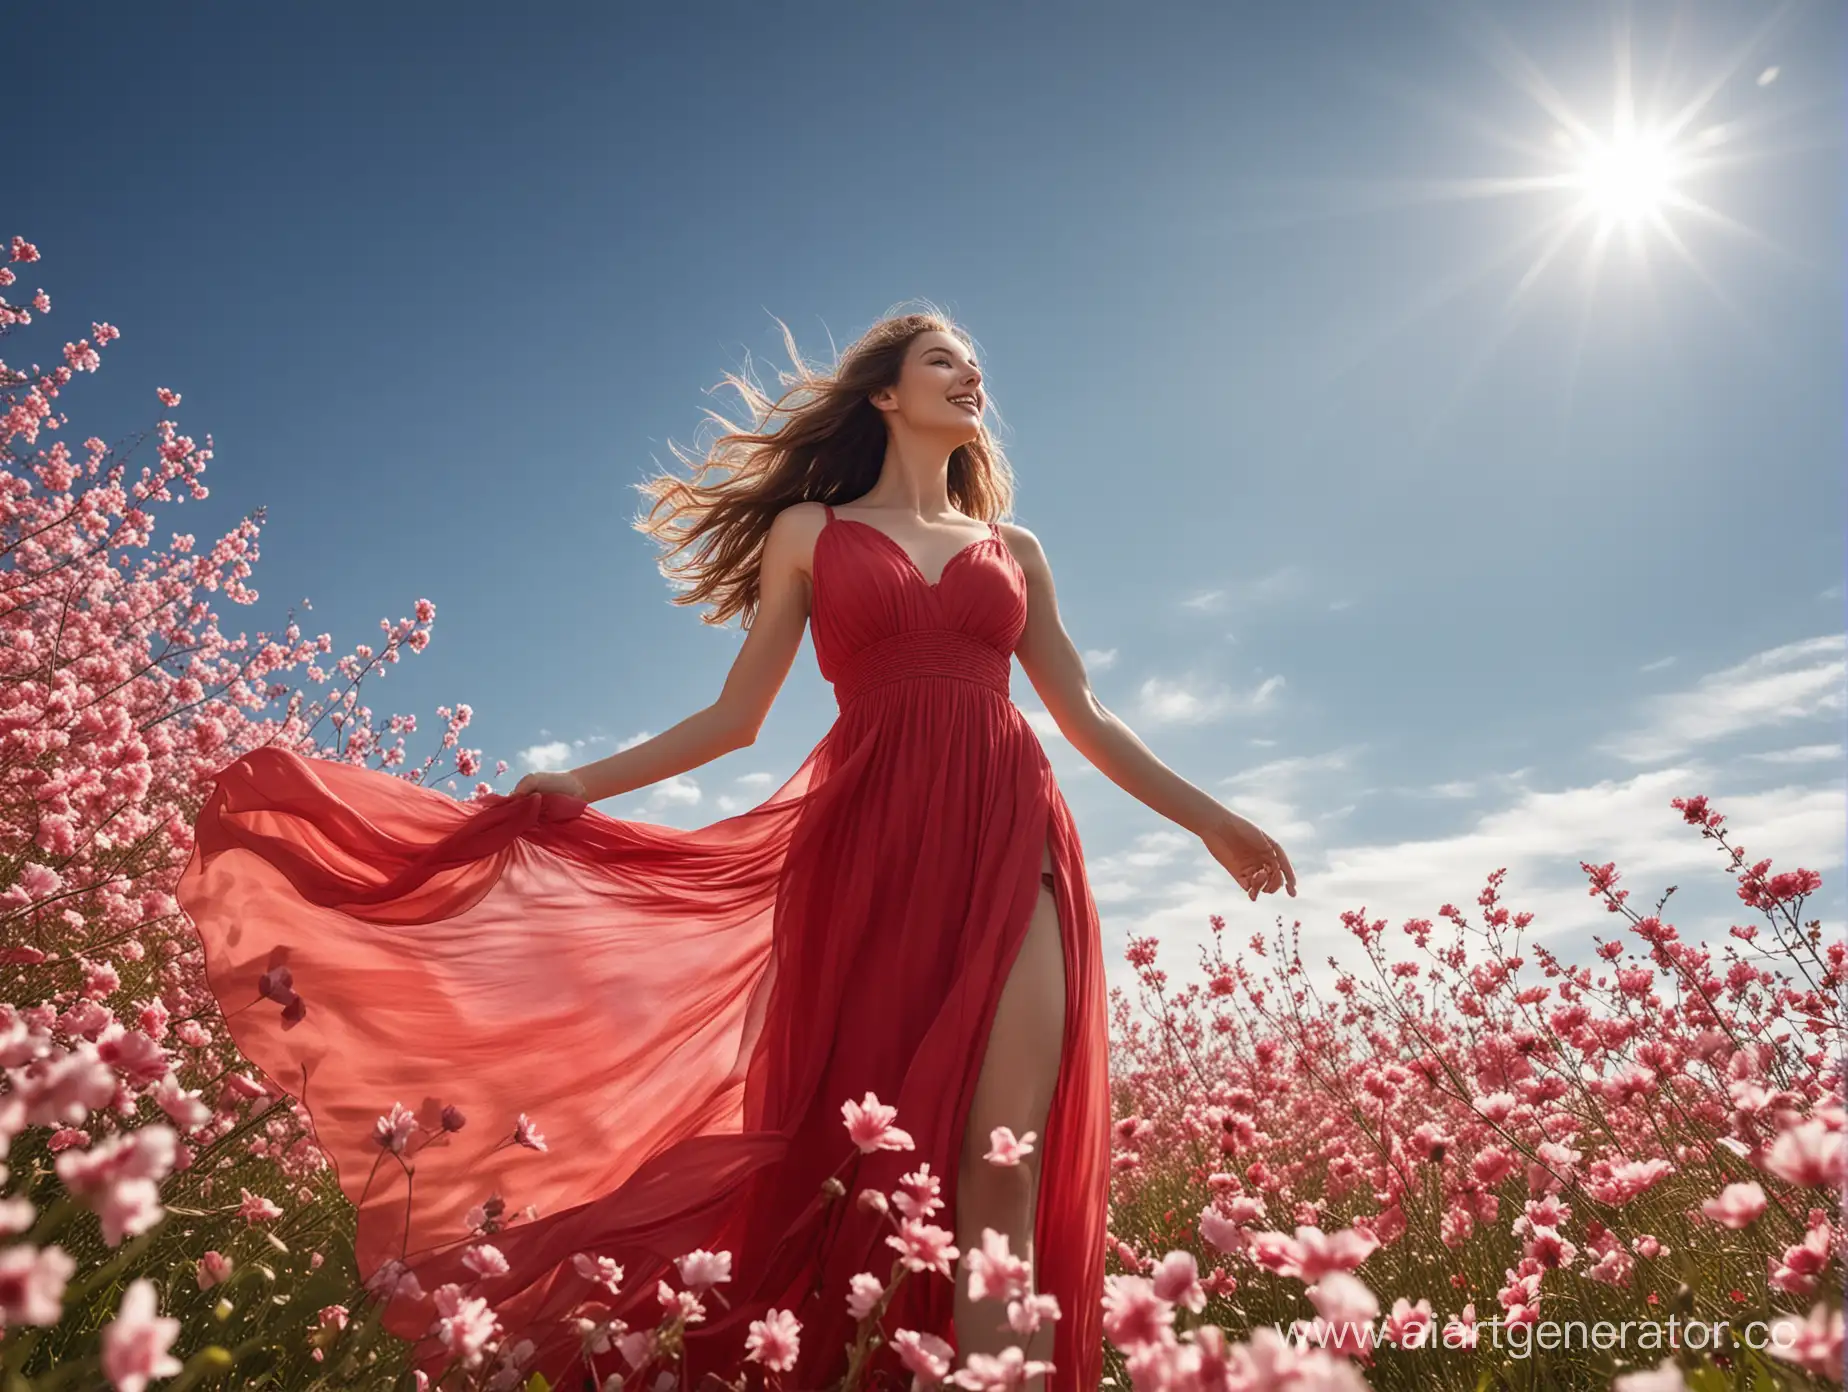 advertising photo of perfume, a model in a long red dress holding flowers on a background of blue sky with pink and white petals flying around, in the modern style of advertising photo, the whole scene is illuminated by sunlight, the whole ad should convey romance and love, the girl stands sideways and smiles at the camera, the composition is balanced, the light from above falls on her face, the atmosphere looks happy and romantic